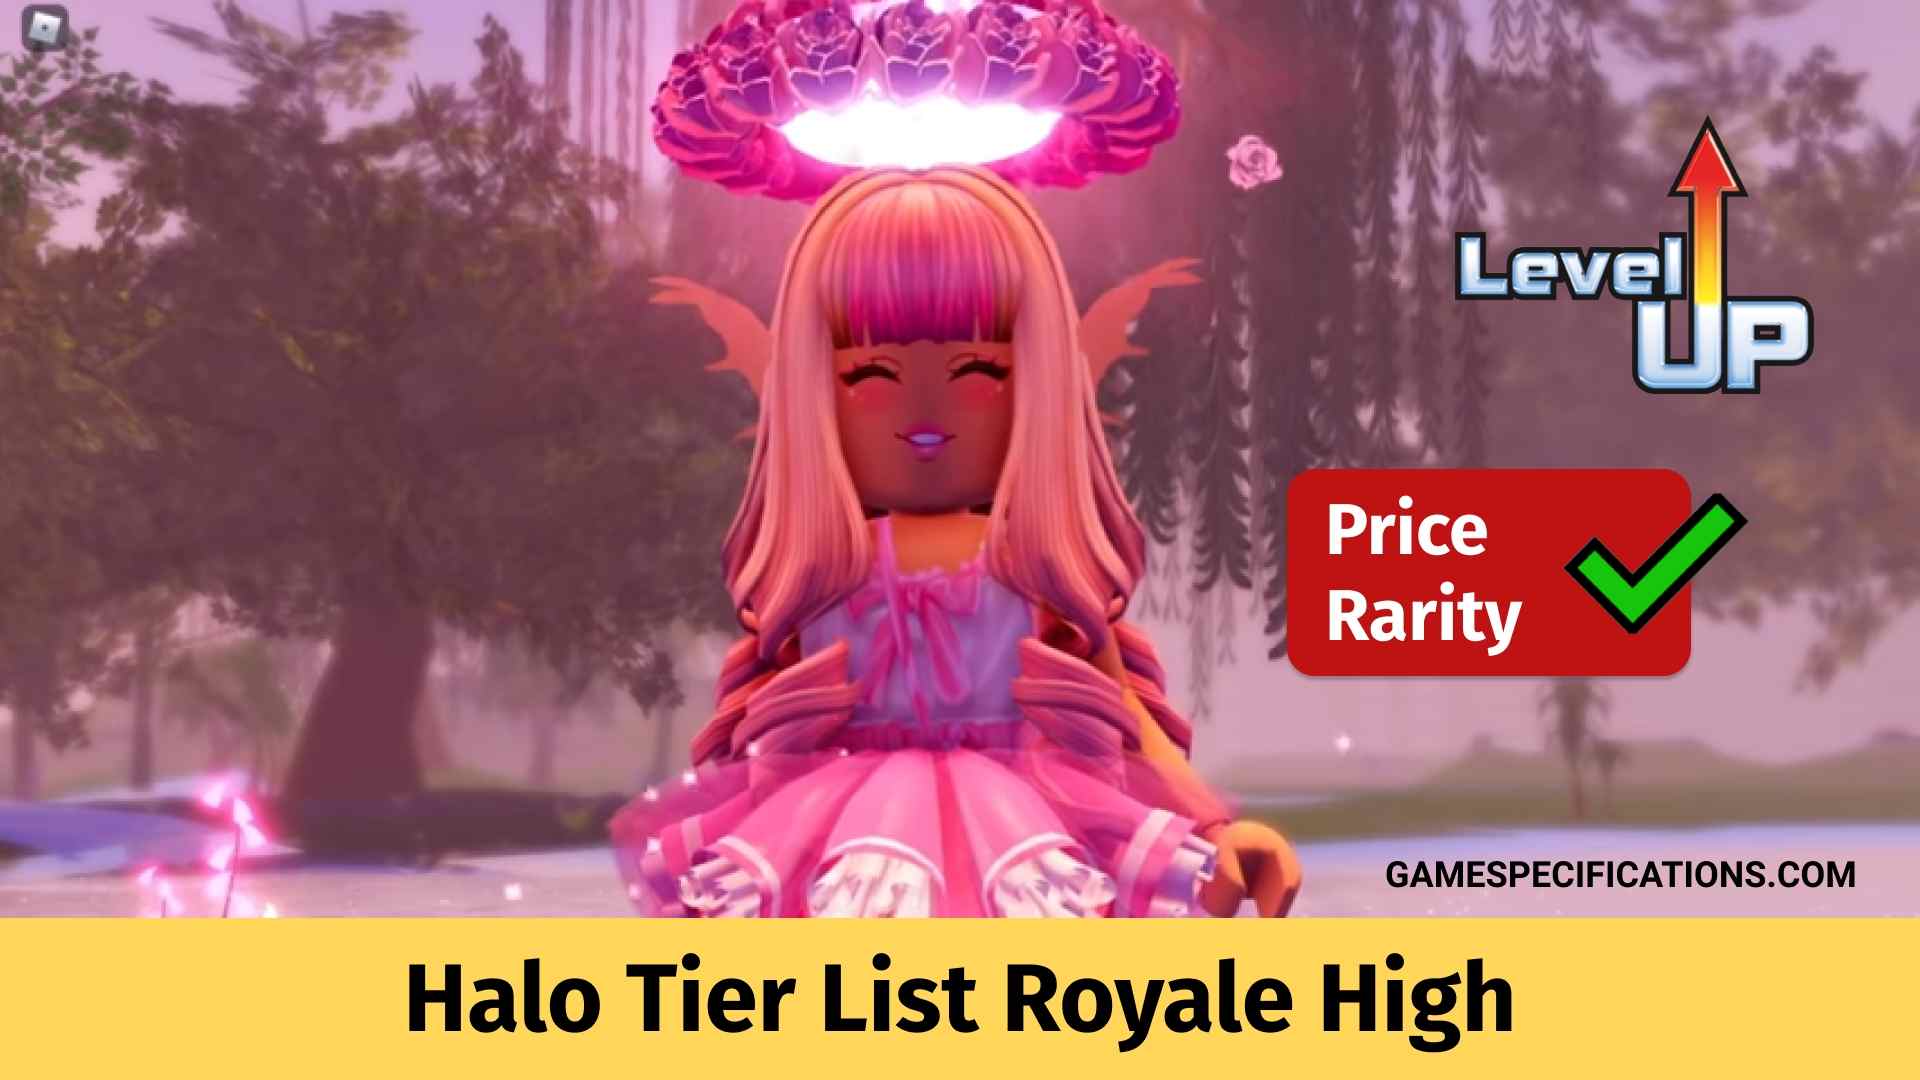 Top Halo Tier List Royale High Based On Rarity 21 Game Specifications